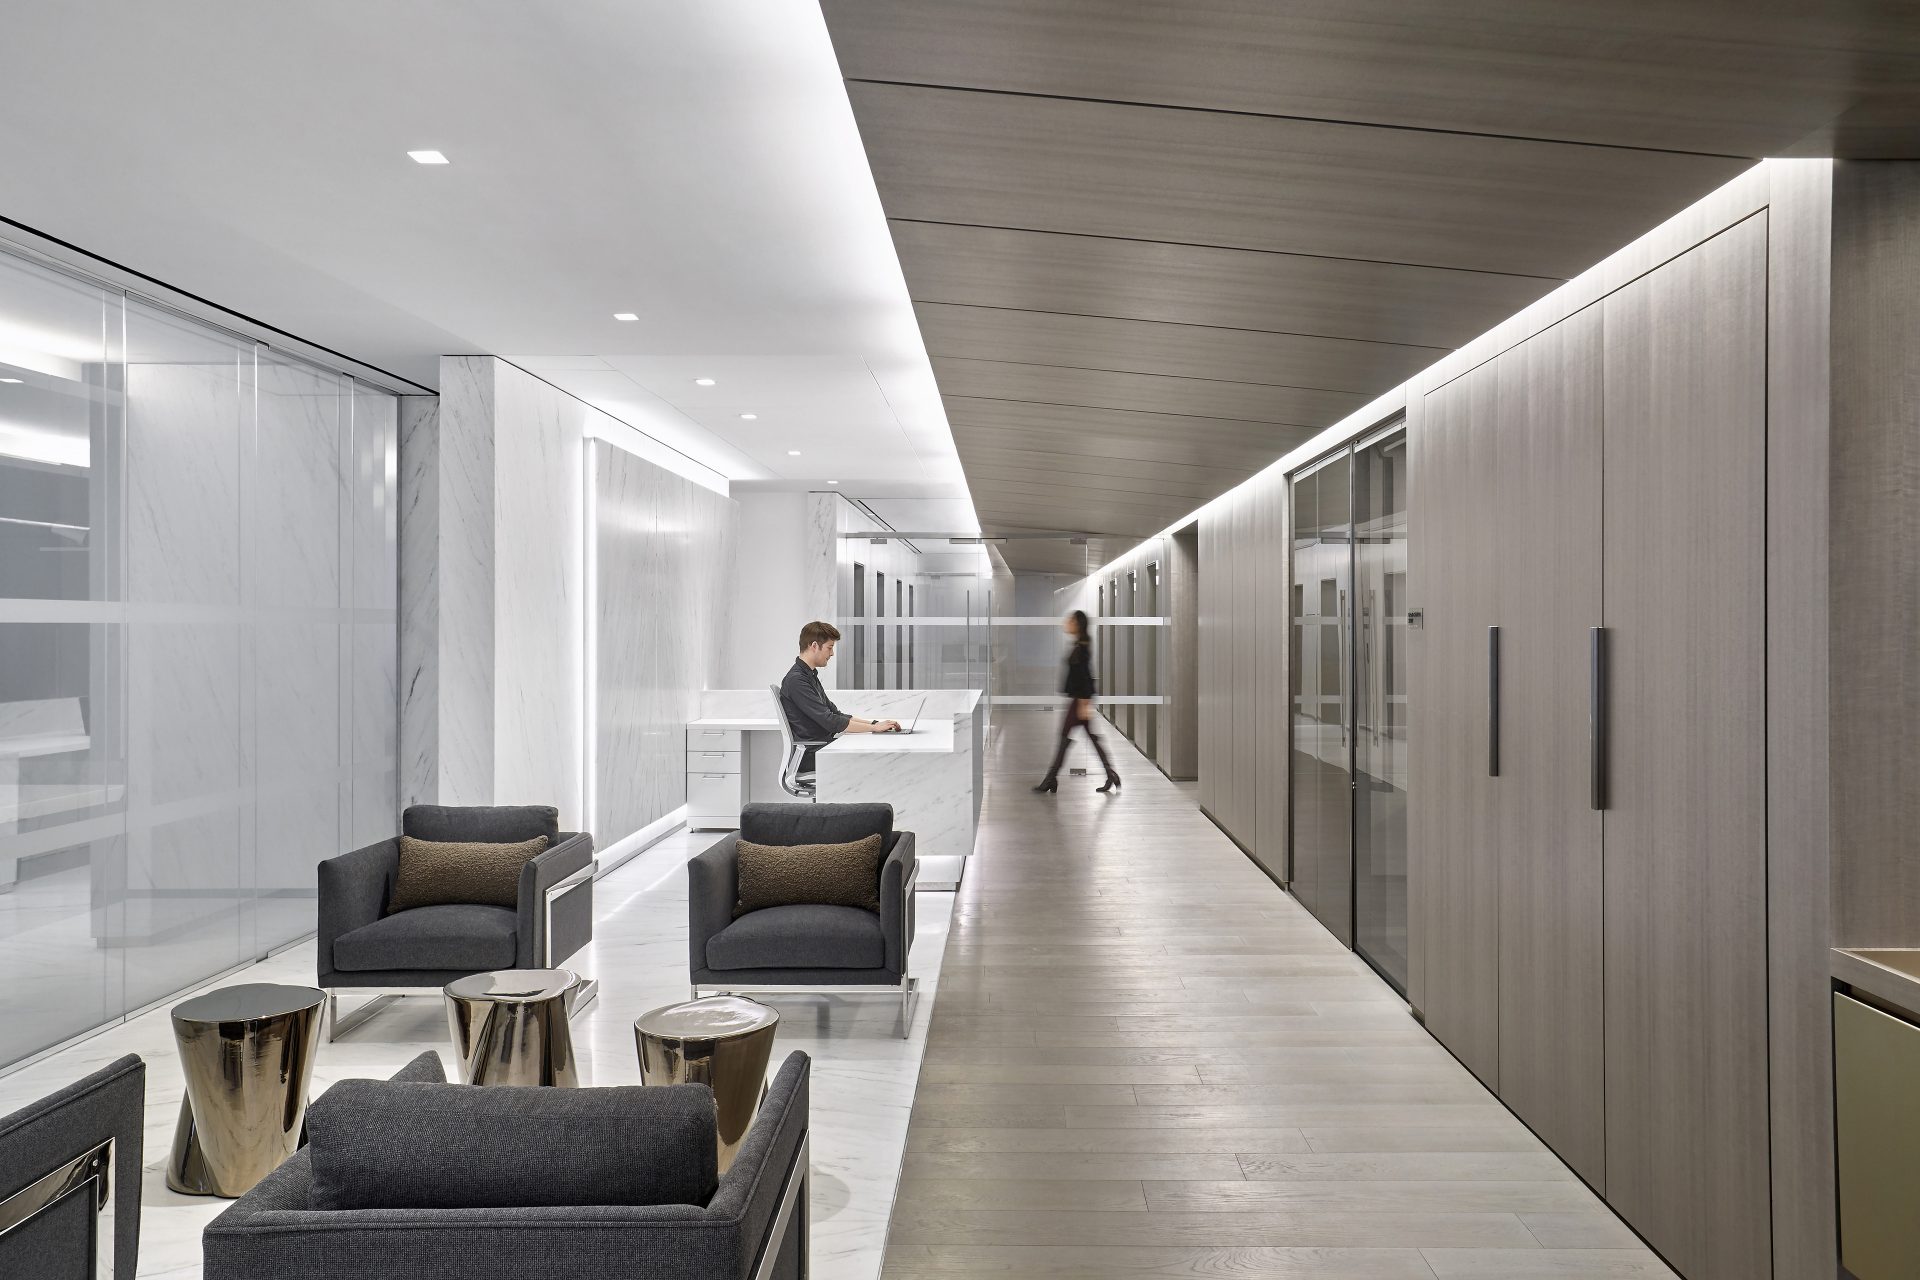 Reception space at the new Omnicom Headquarters